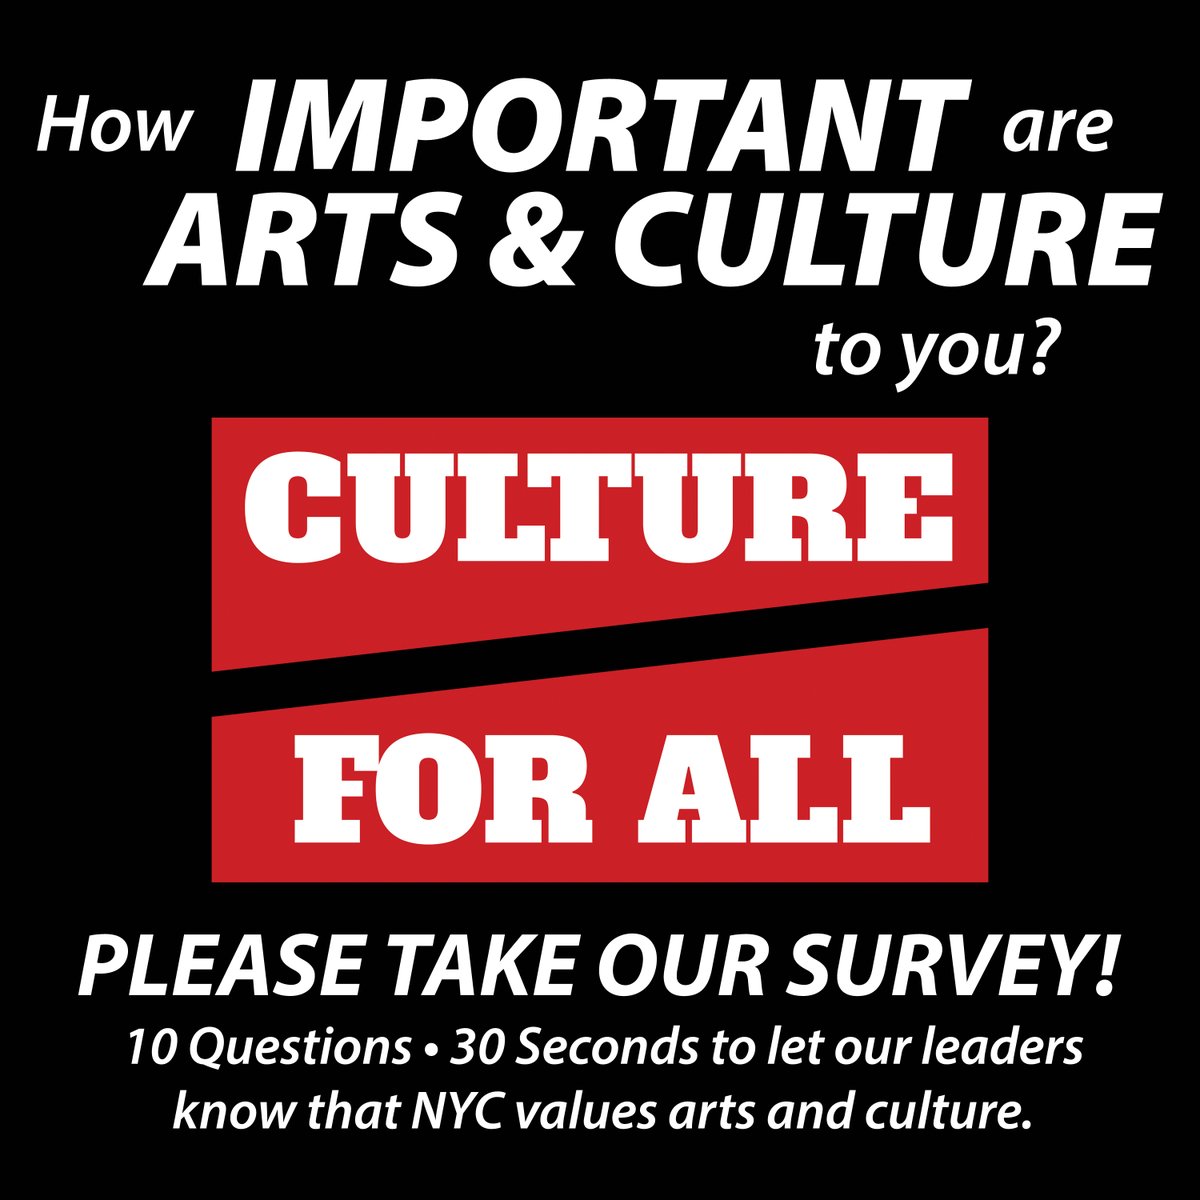 How important are culture and art to you and your family's life in NYC? Please take this one-minute survey so your voice and opinions are heard. Help raise awareness about the importance of culture and arts to every NYC community! docs.google.com/forms/d/e/1FAI…